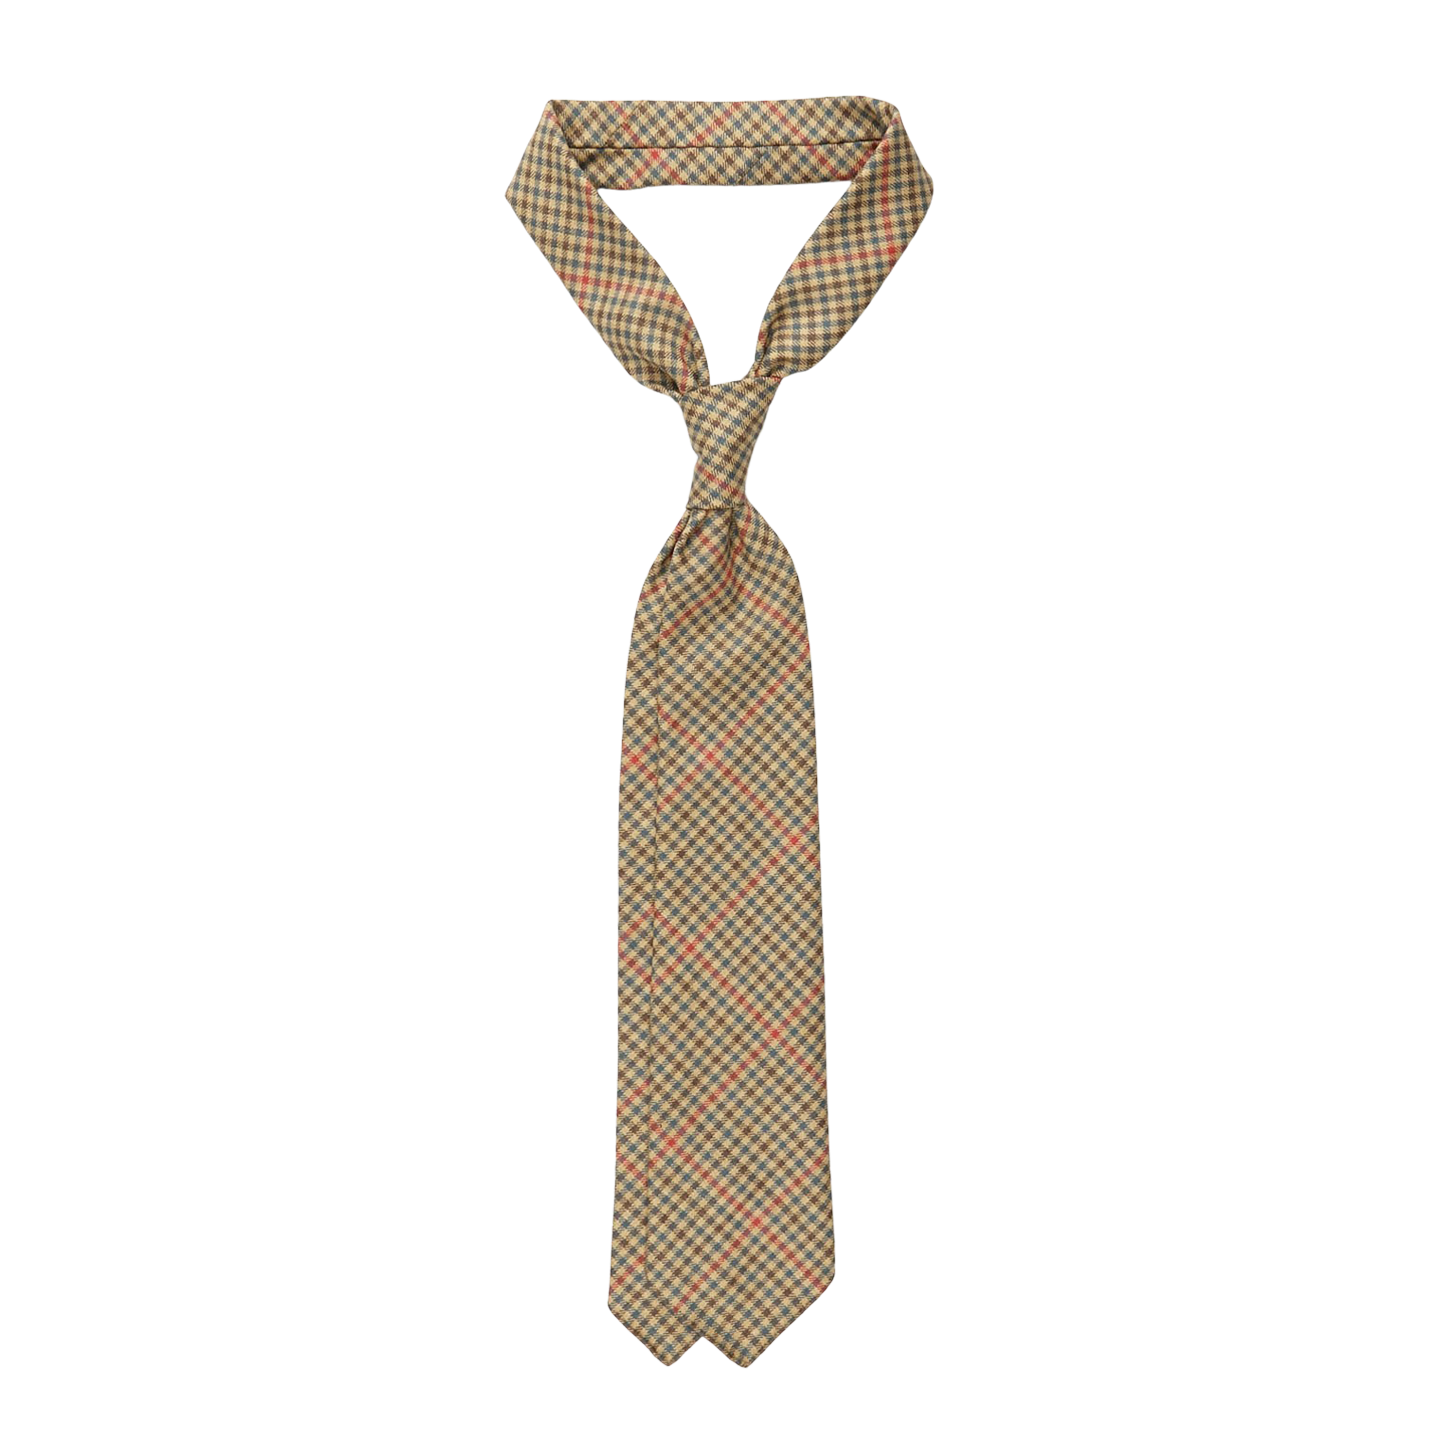 Dreaming of Monday Light Green Micro Gunclub Checked 7-Fold Wool Tie Feature